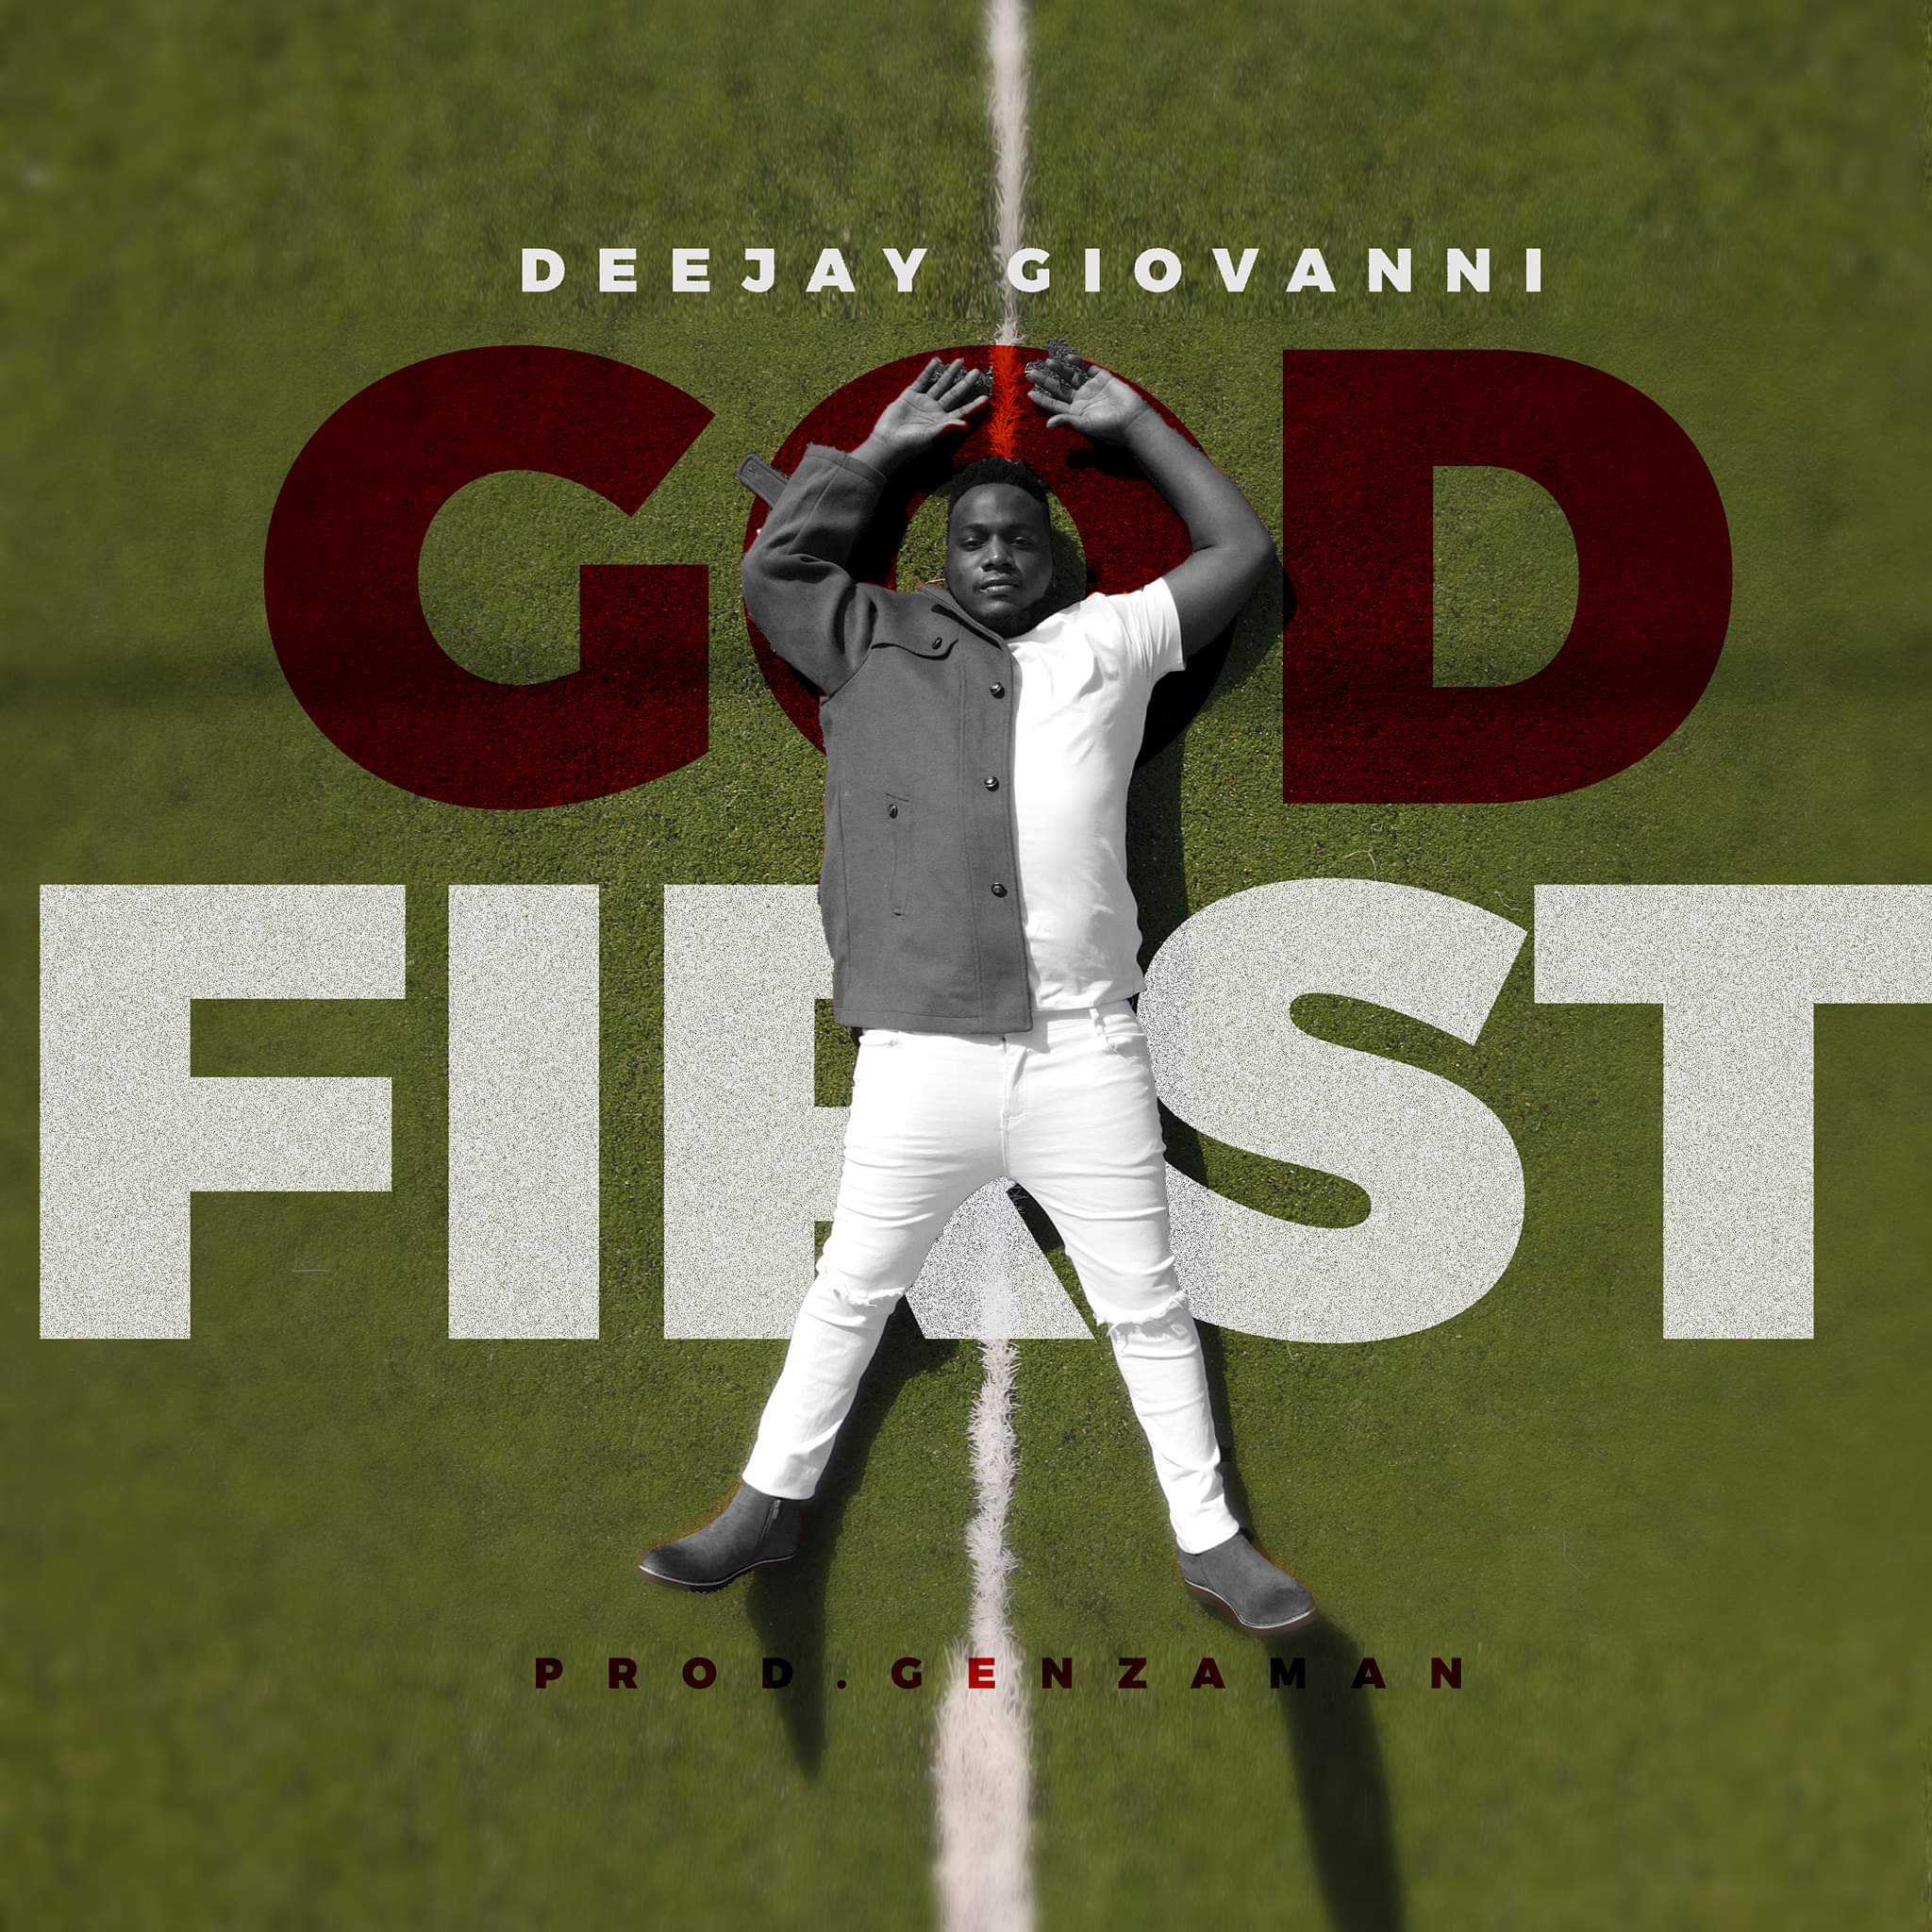 The DJ joins Gospel Music forces with another hit anthen "GOD FIRST", remixed by Prod. Genzaman